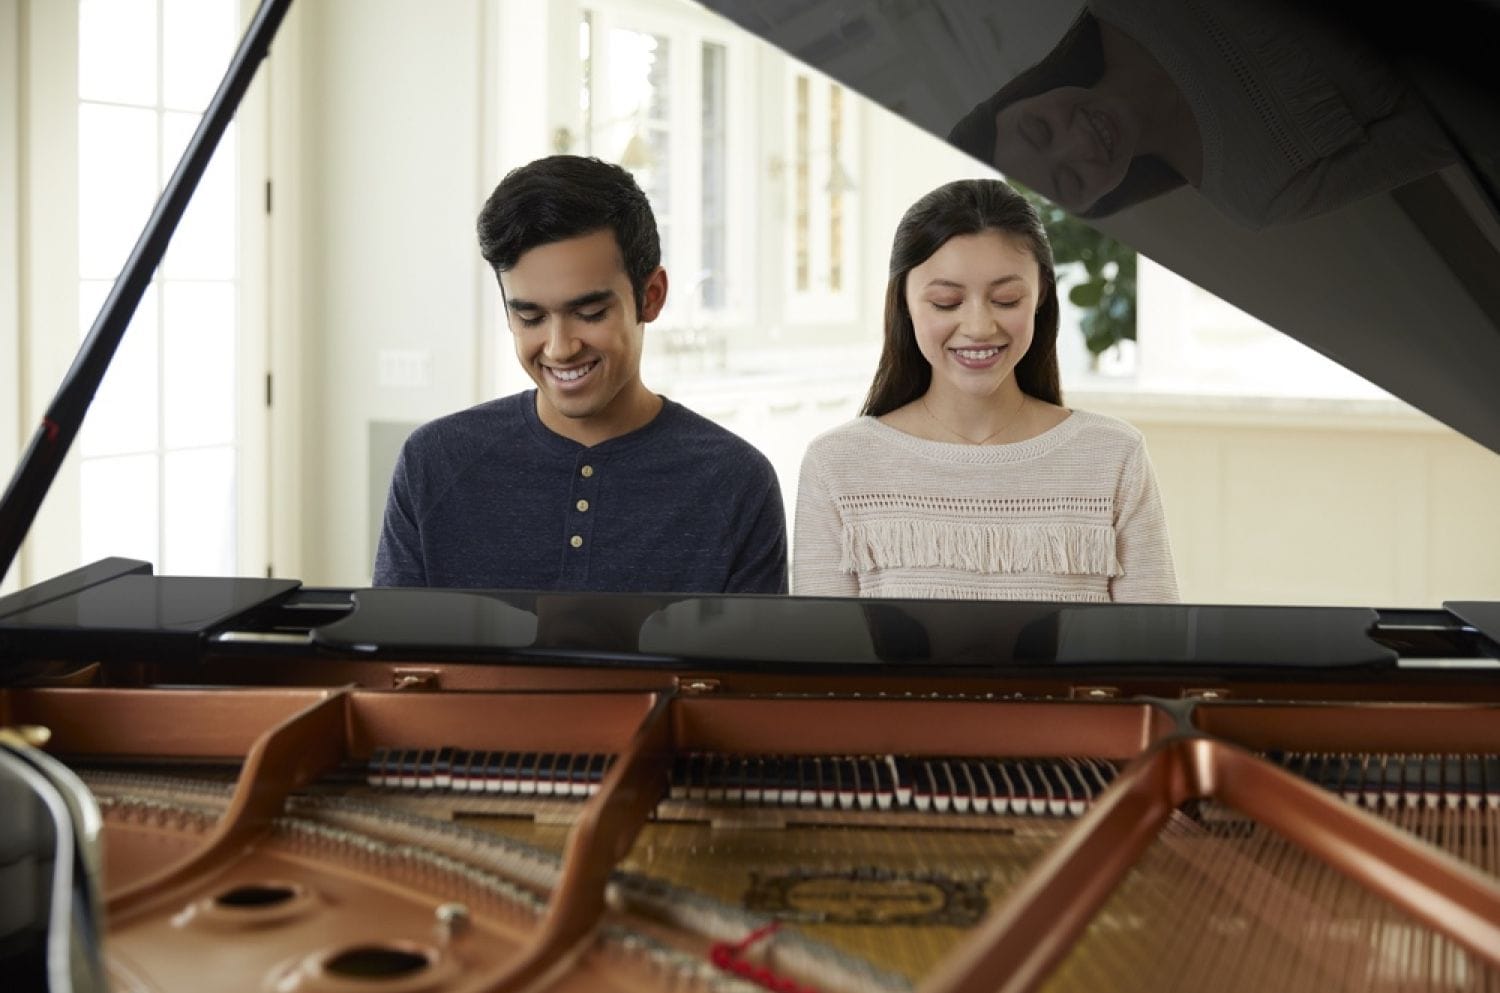 Young man and young woman seated side by side smiling and playing piano with lid open in foreground.